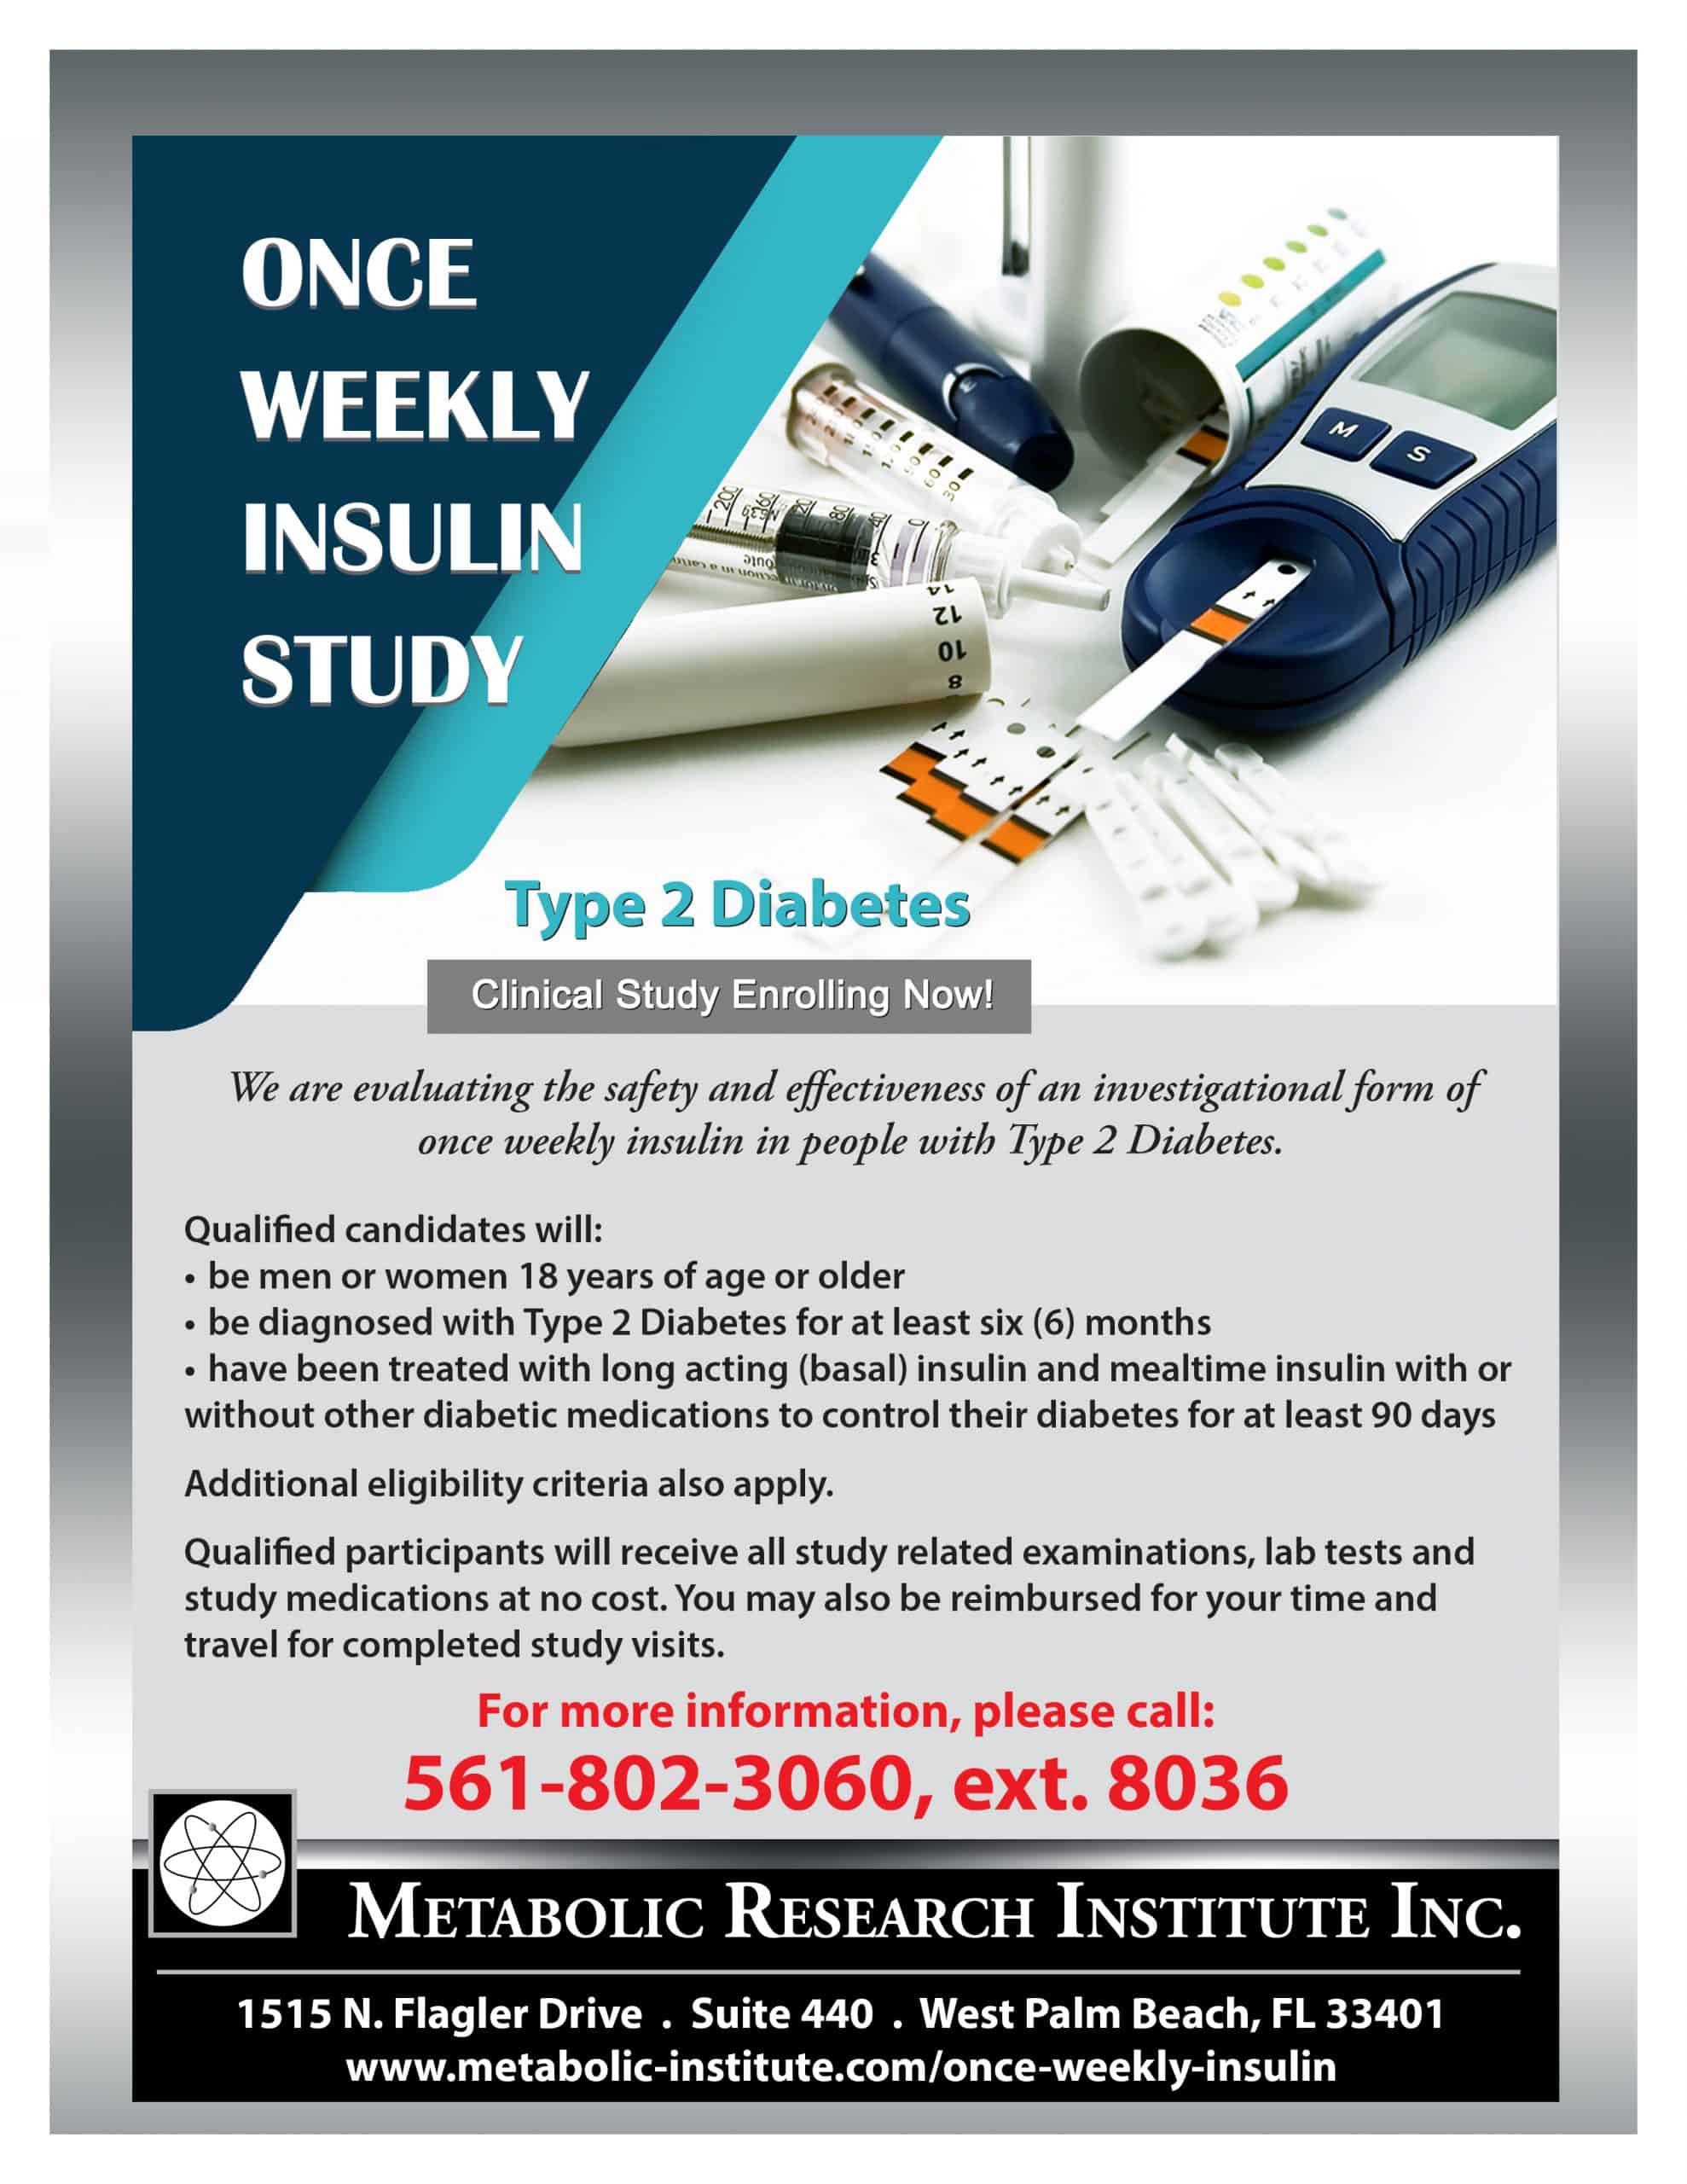 ONce Wekly Insulin for Type 2 Diabetes Study Flyer